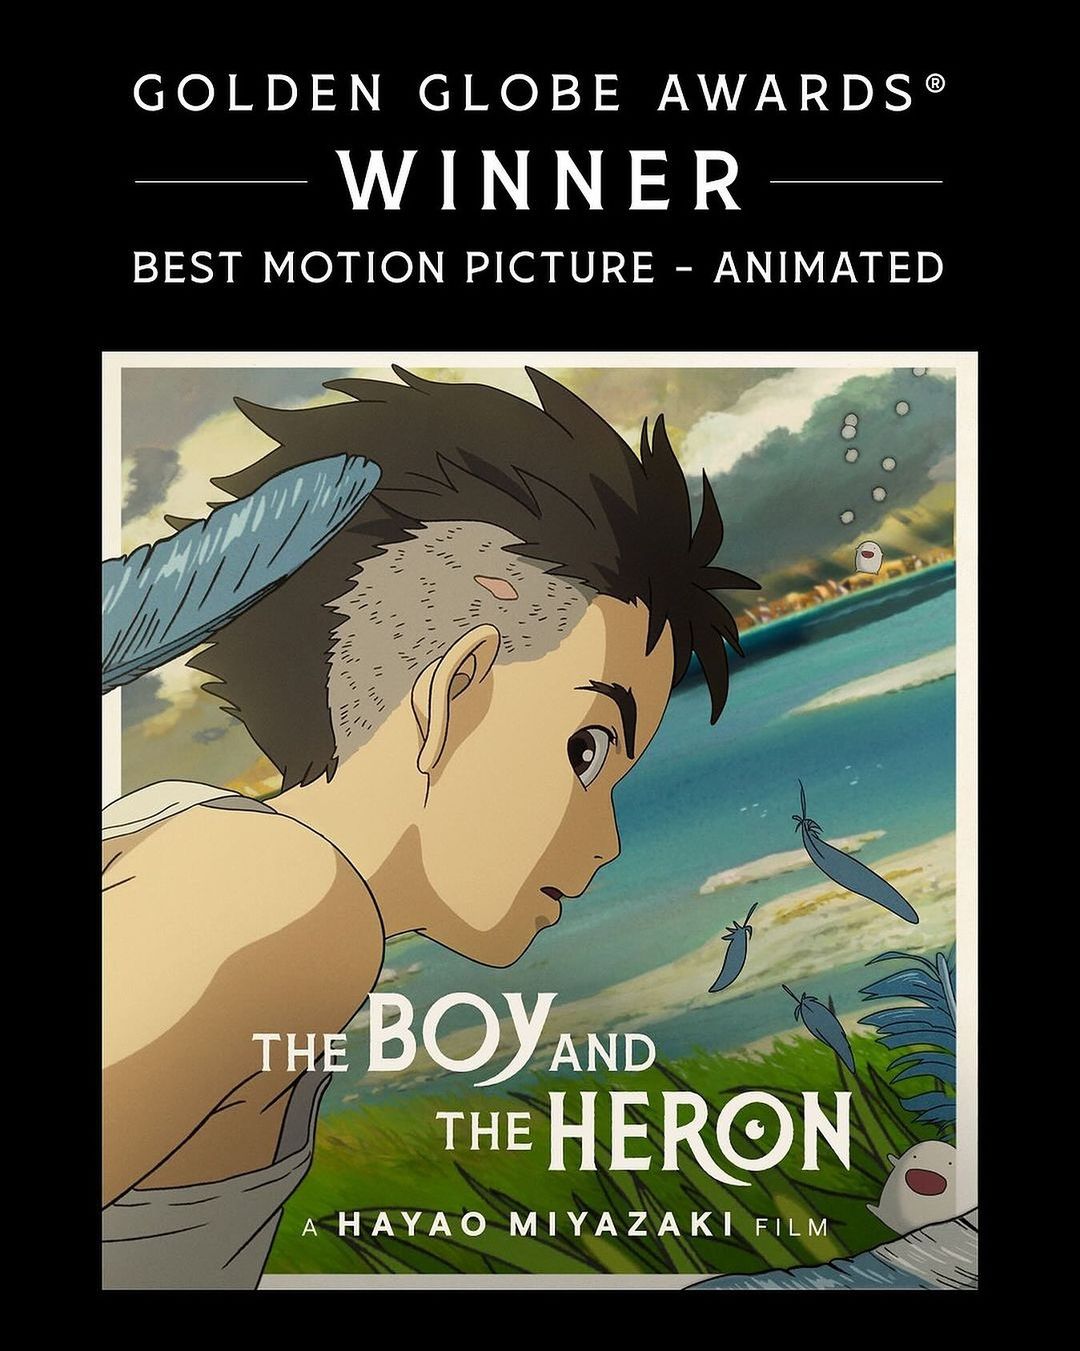 "The Boy And The Heron" bagged the best animated motion picture at the 81st Golden Globes